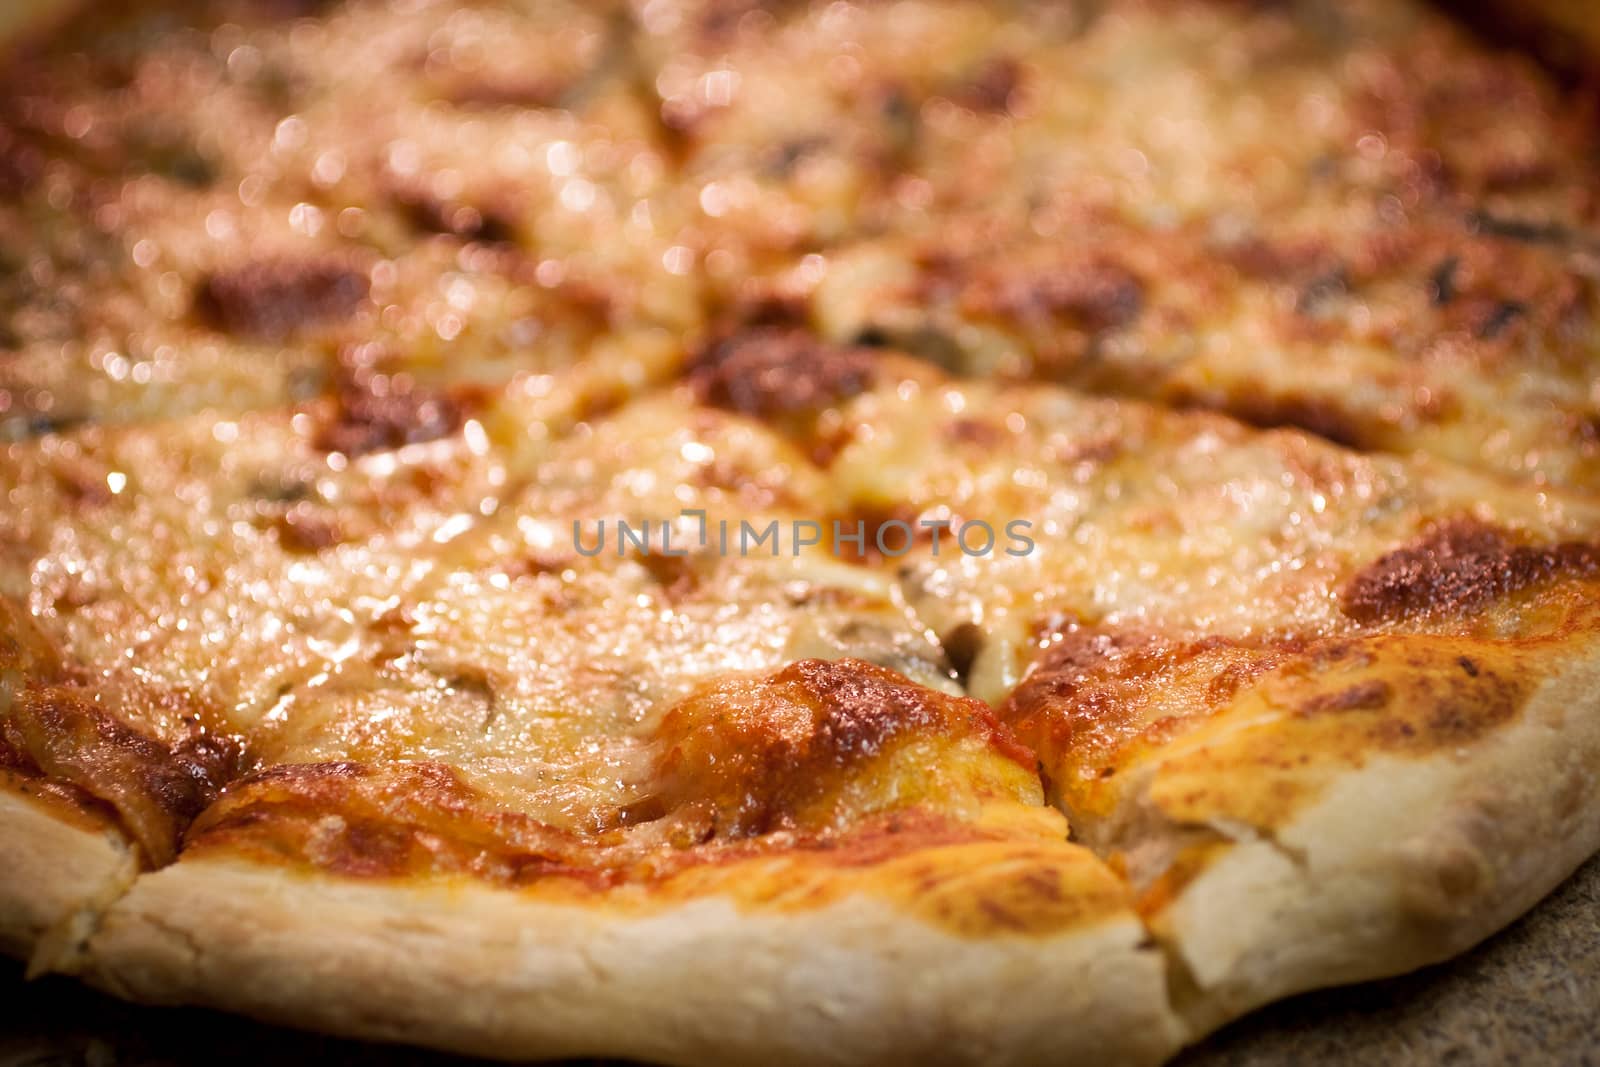 A freshly baked pizza, ready to searve.